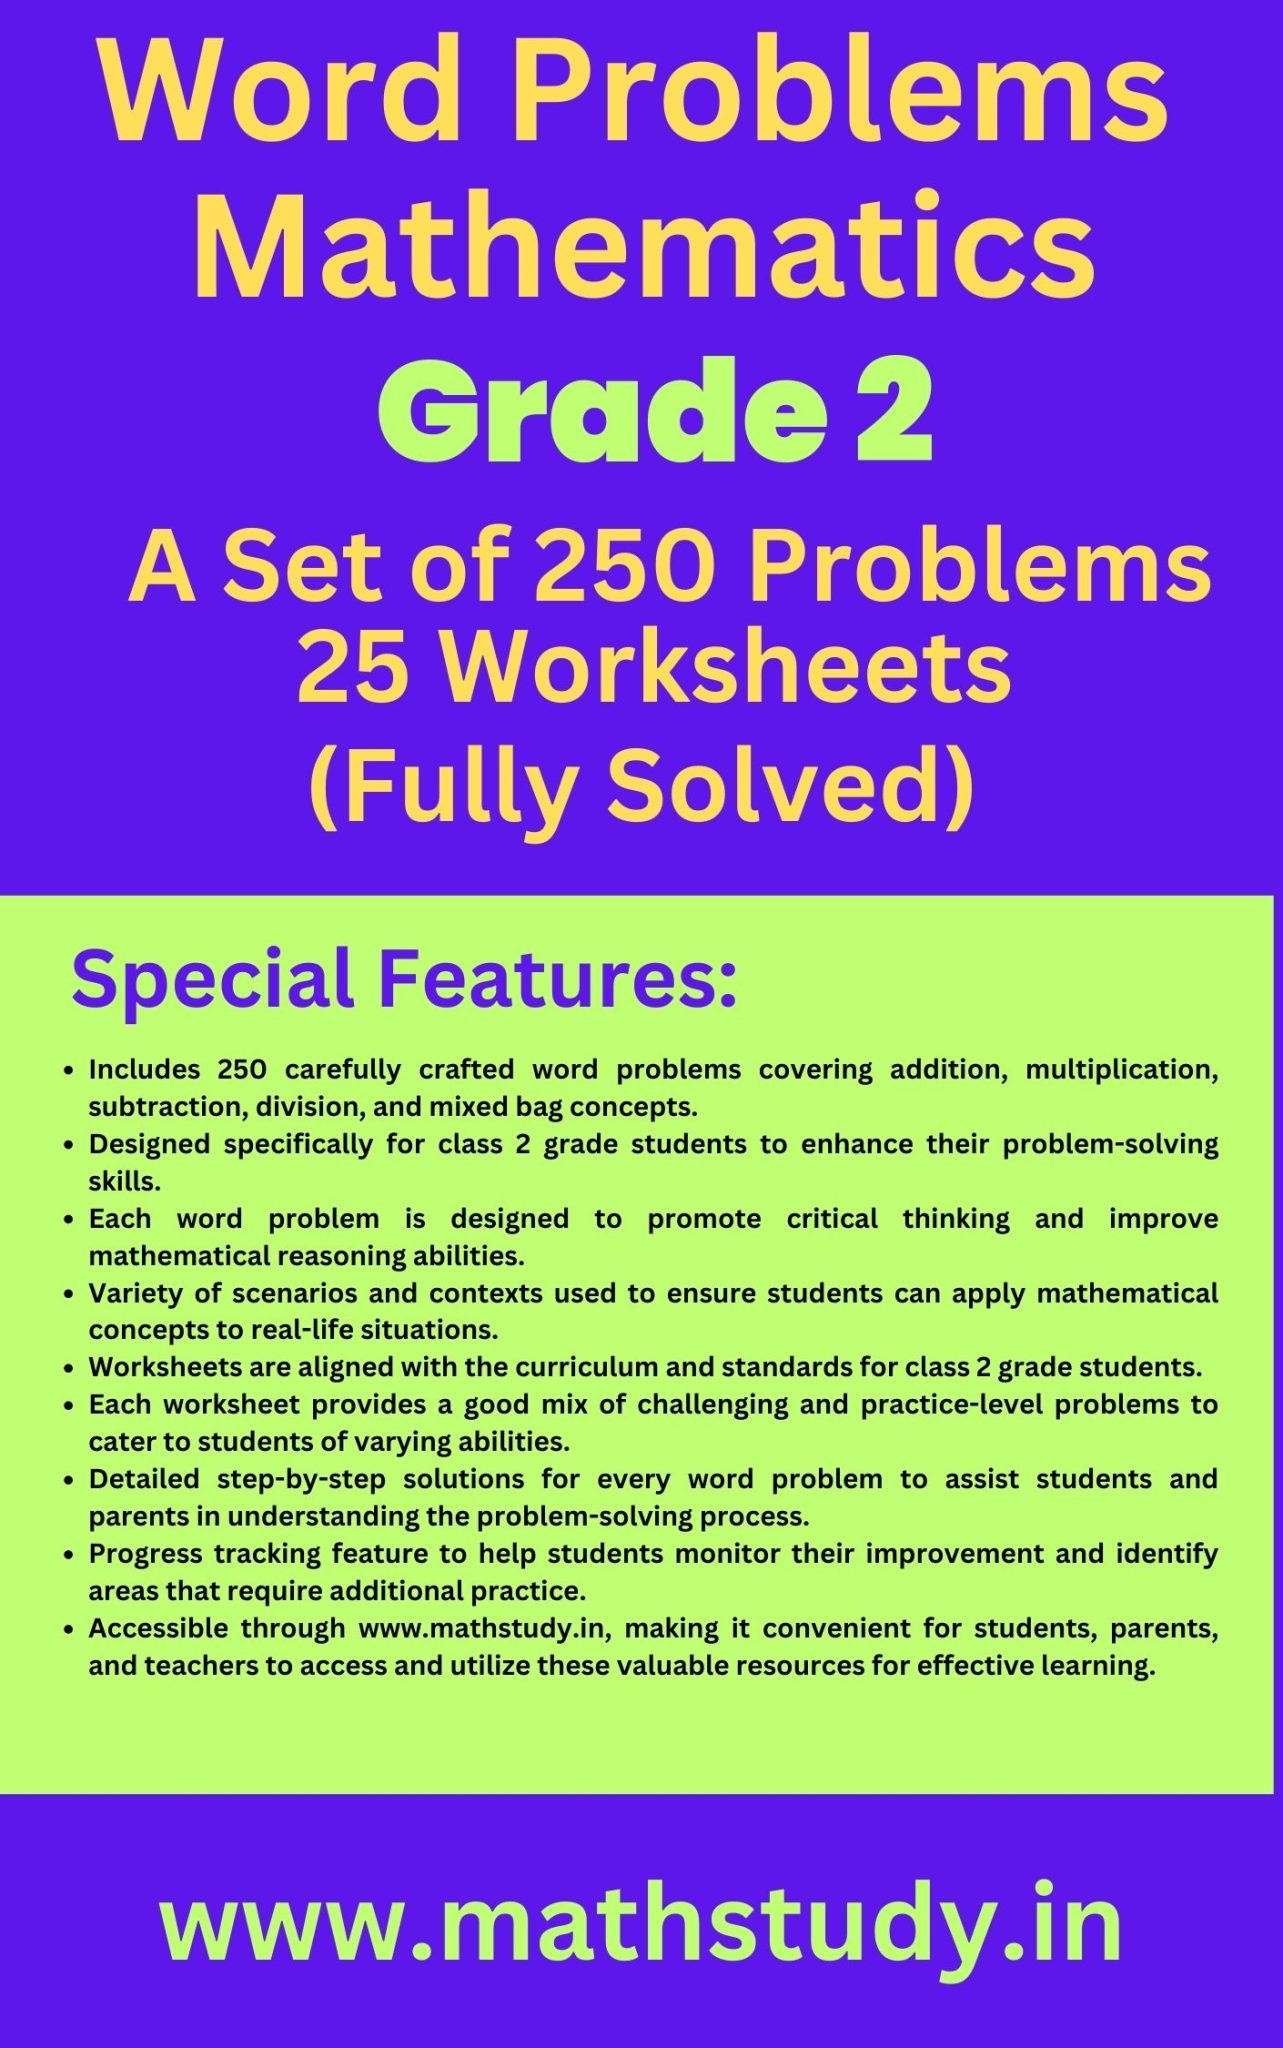 word-problems-for-grade-2-multiplication-and-division-archives-best-e